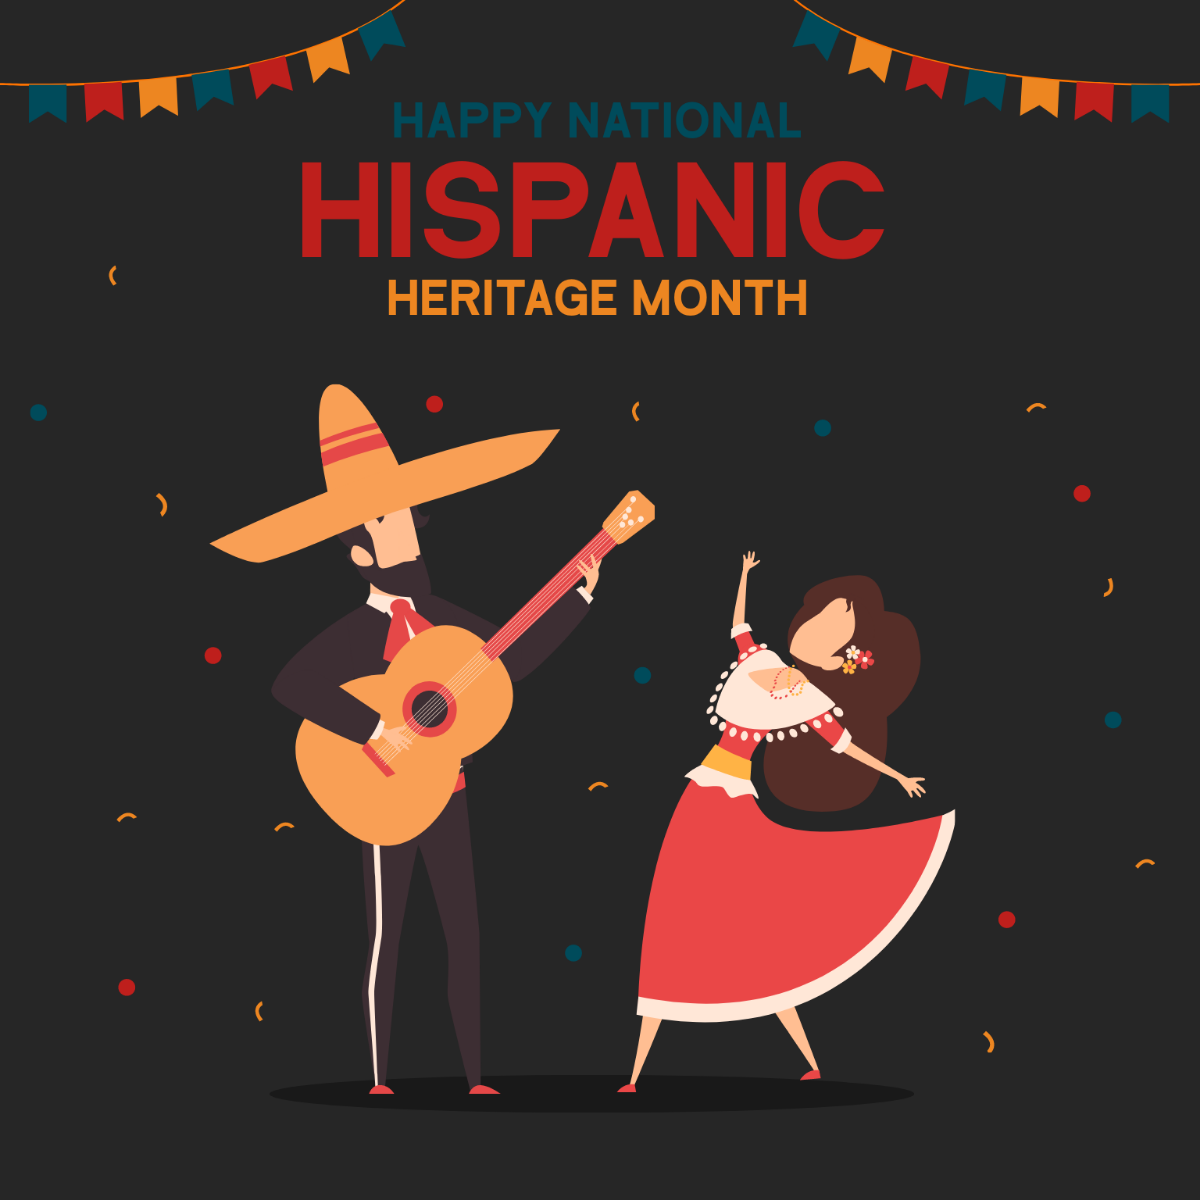 Happy National Hispanic Heritage Month Vector Template